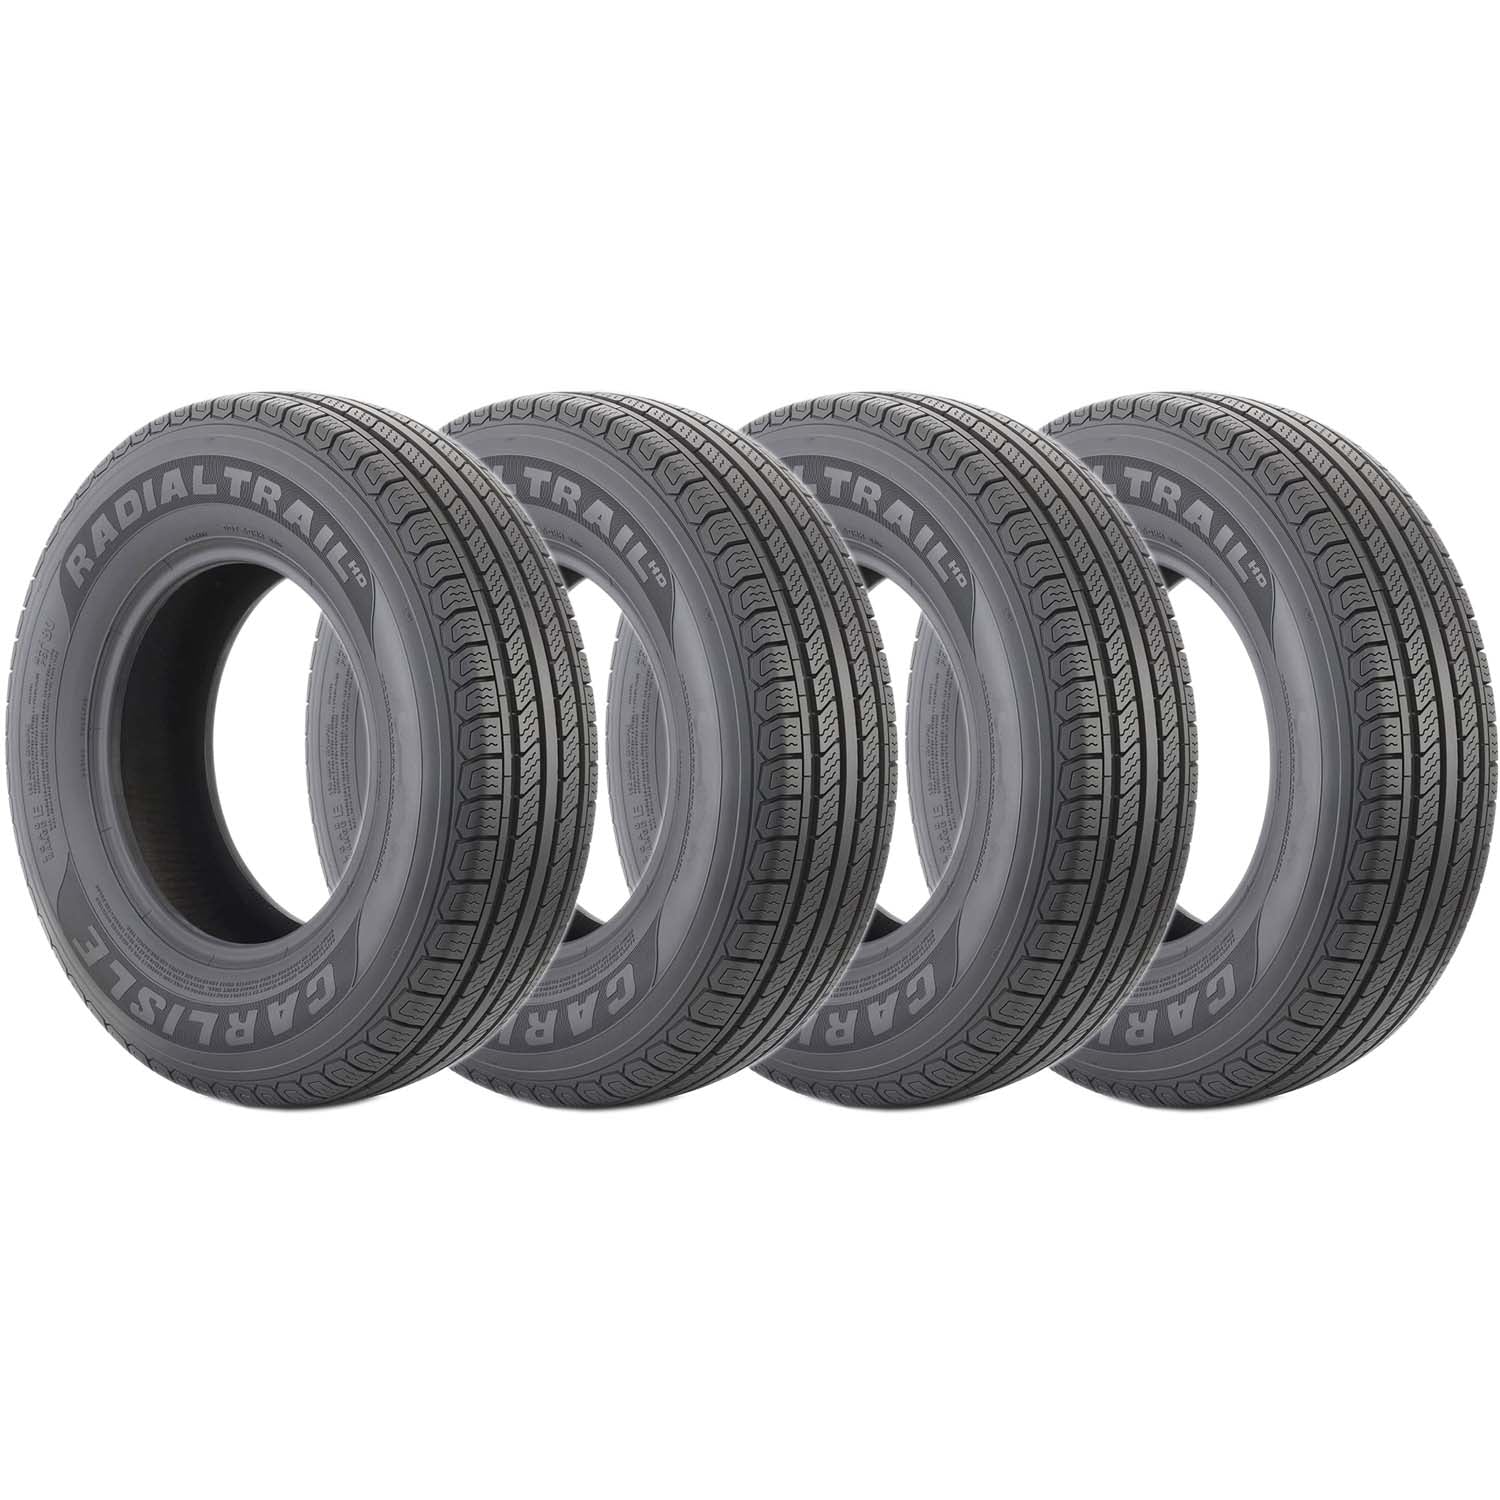 Carlisle Radial Trail HD Trailer Tire LRC 6ply ST215/75R14 Pack of 4